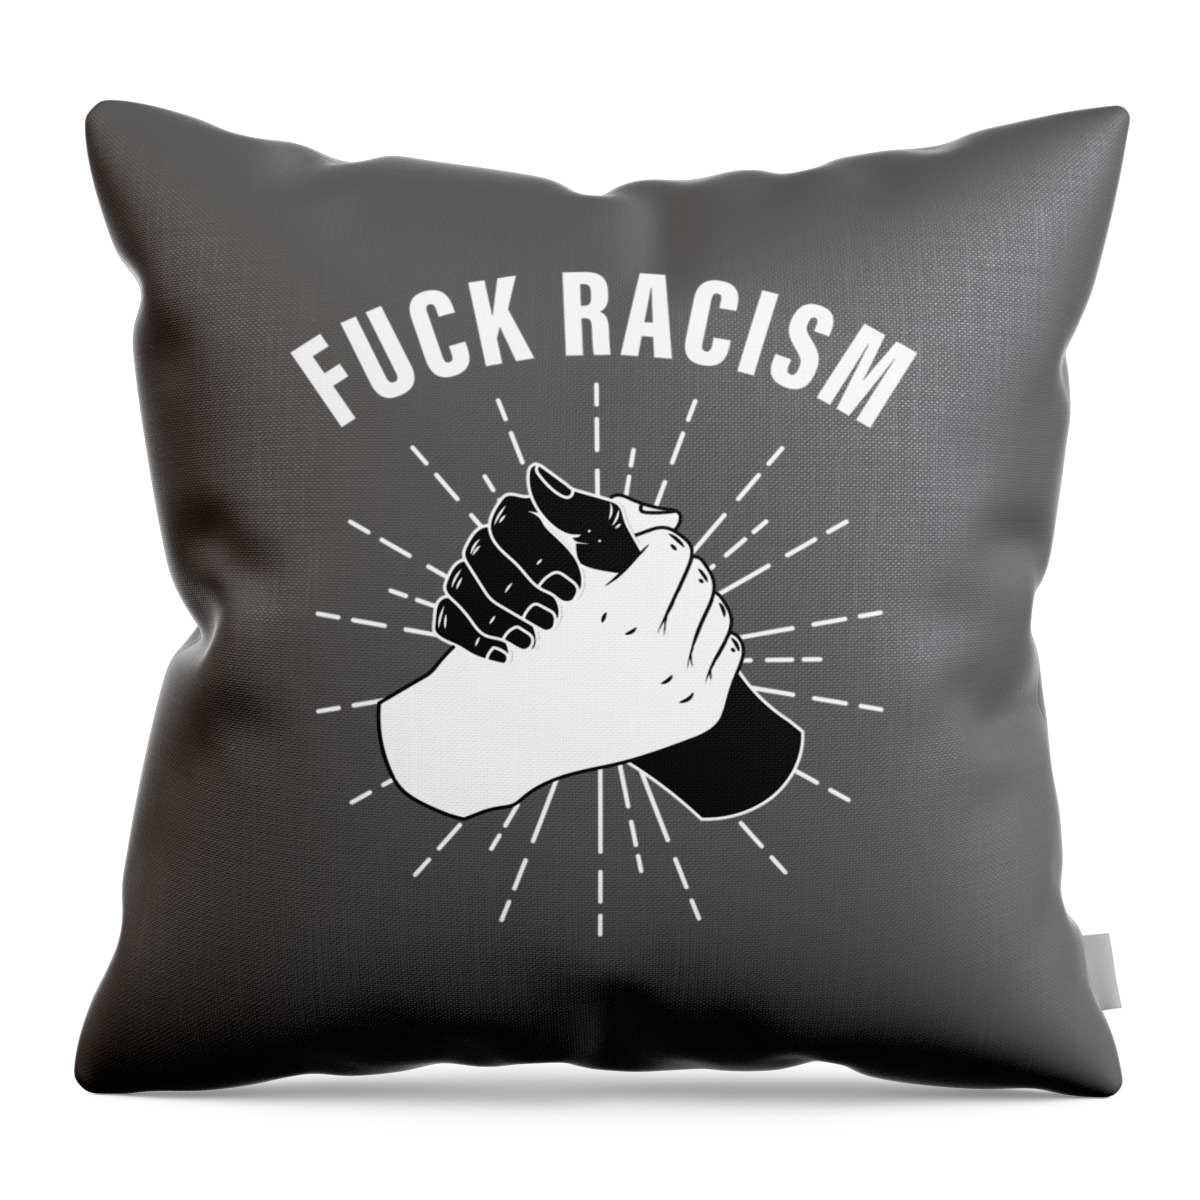 Equality Throw Pillow featuring the digital art Fuck Racism - Straight Edge For Men Women Protester Humanity Equality by Mercoat UG Haftungsbeschraenkt